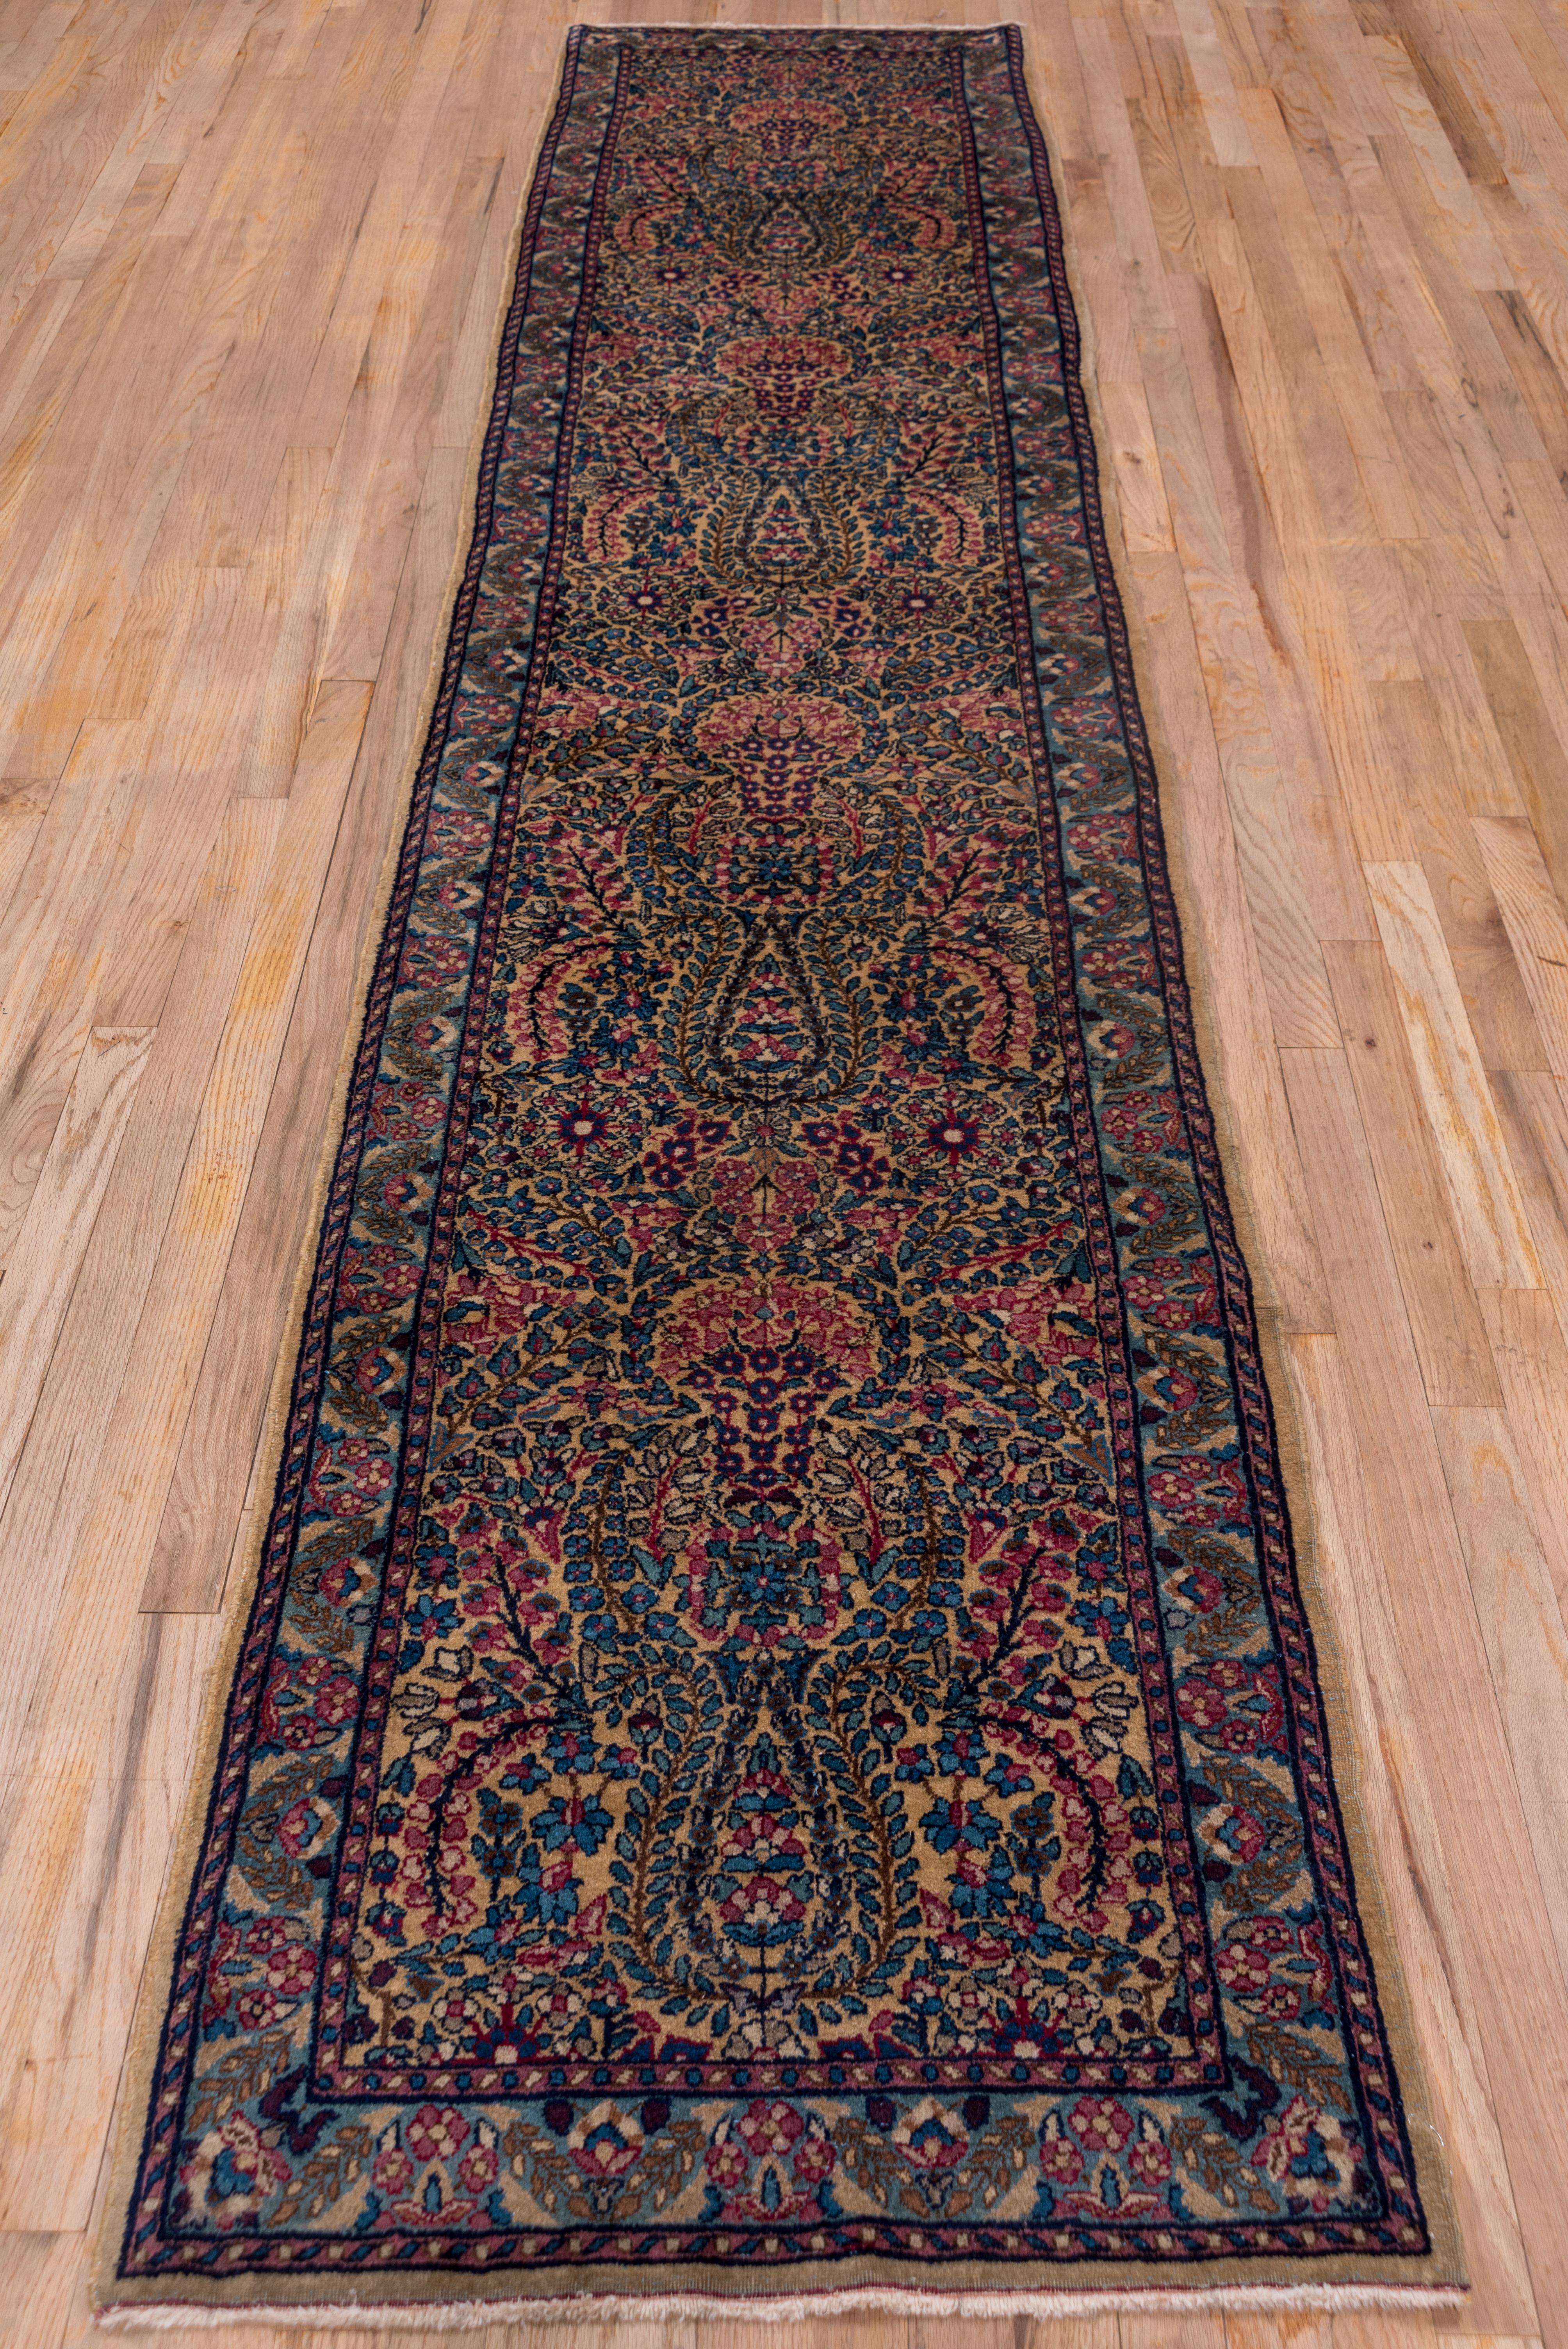 This ivory ground southeast Persian city runner presents a close pattern of vines, tiny leaves and miniature flowers. The green border displays leafy sprays and rosettes. This rug has a close, even weave, and all natural dyes.